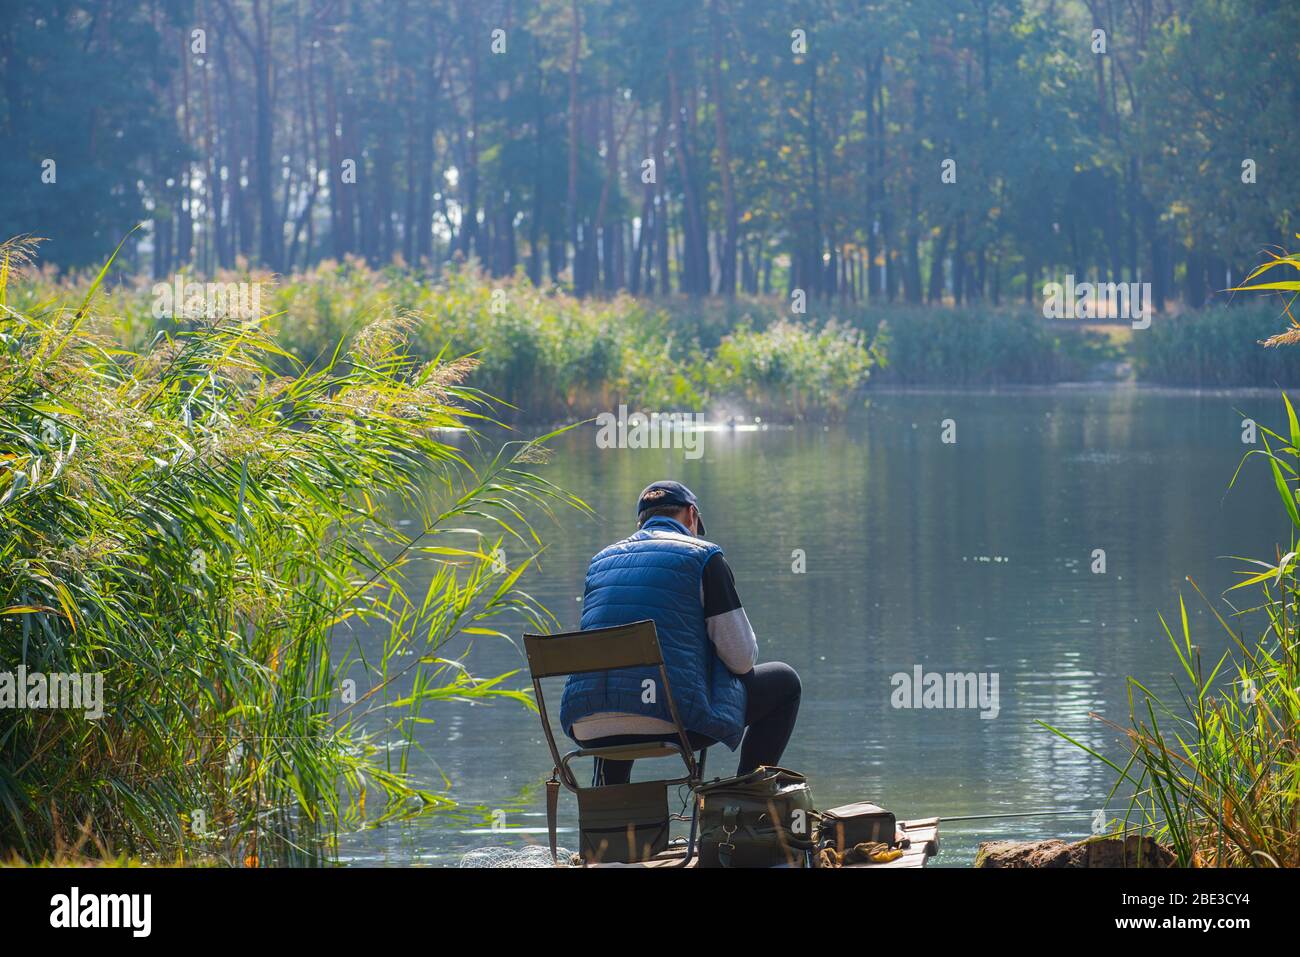 A fisherman with a rod sitting on the peaceful bank of a forest lake in the rays of autumn sun. Fishing accessories. The concept of outdoor activity Stock Photo